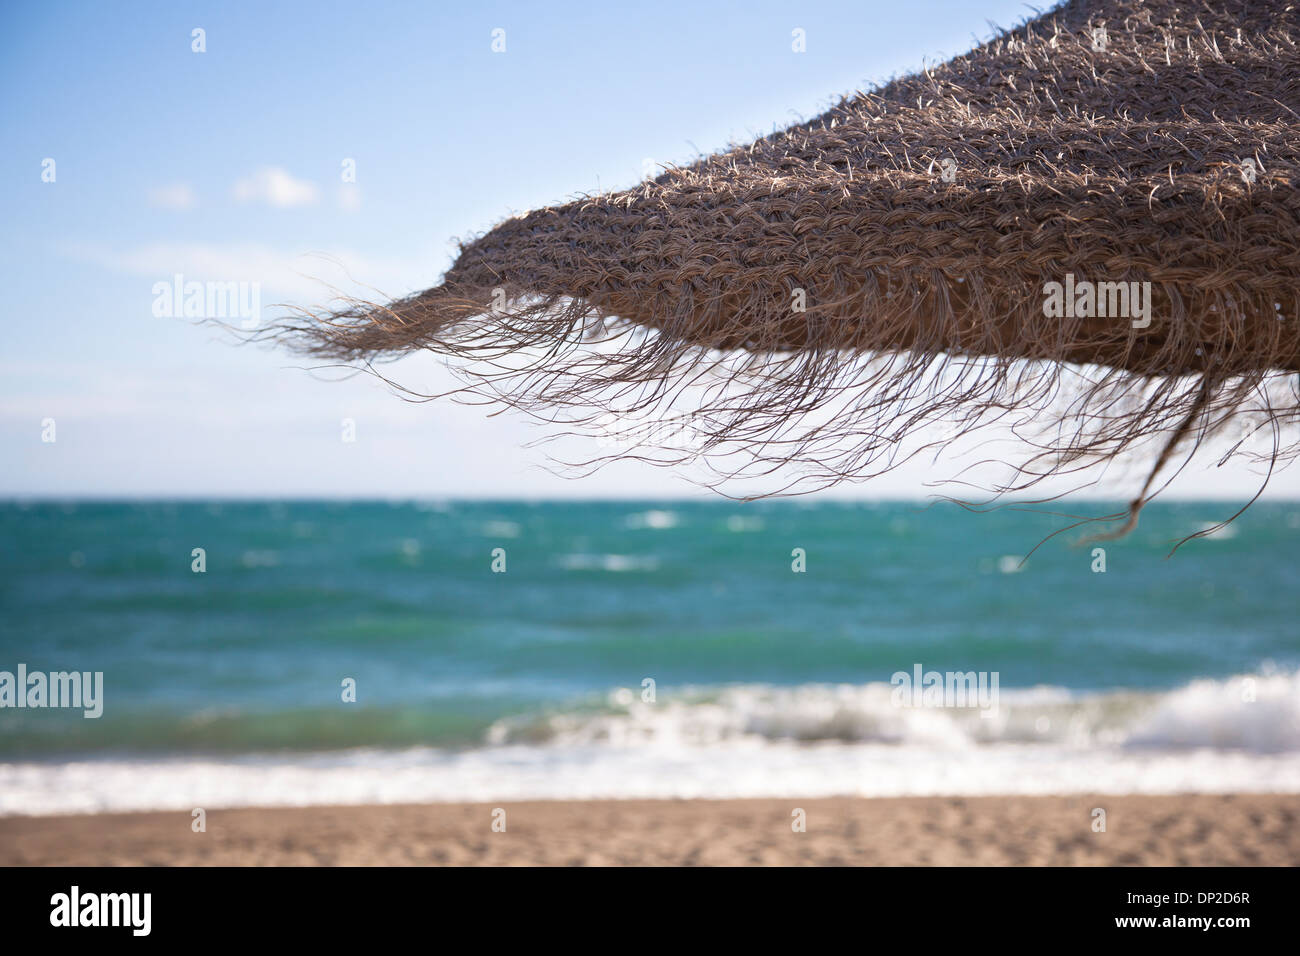 Close up of straw parasol in front of the ocean. Stock Photo